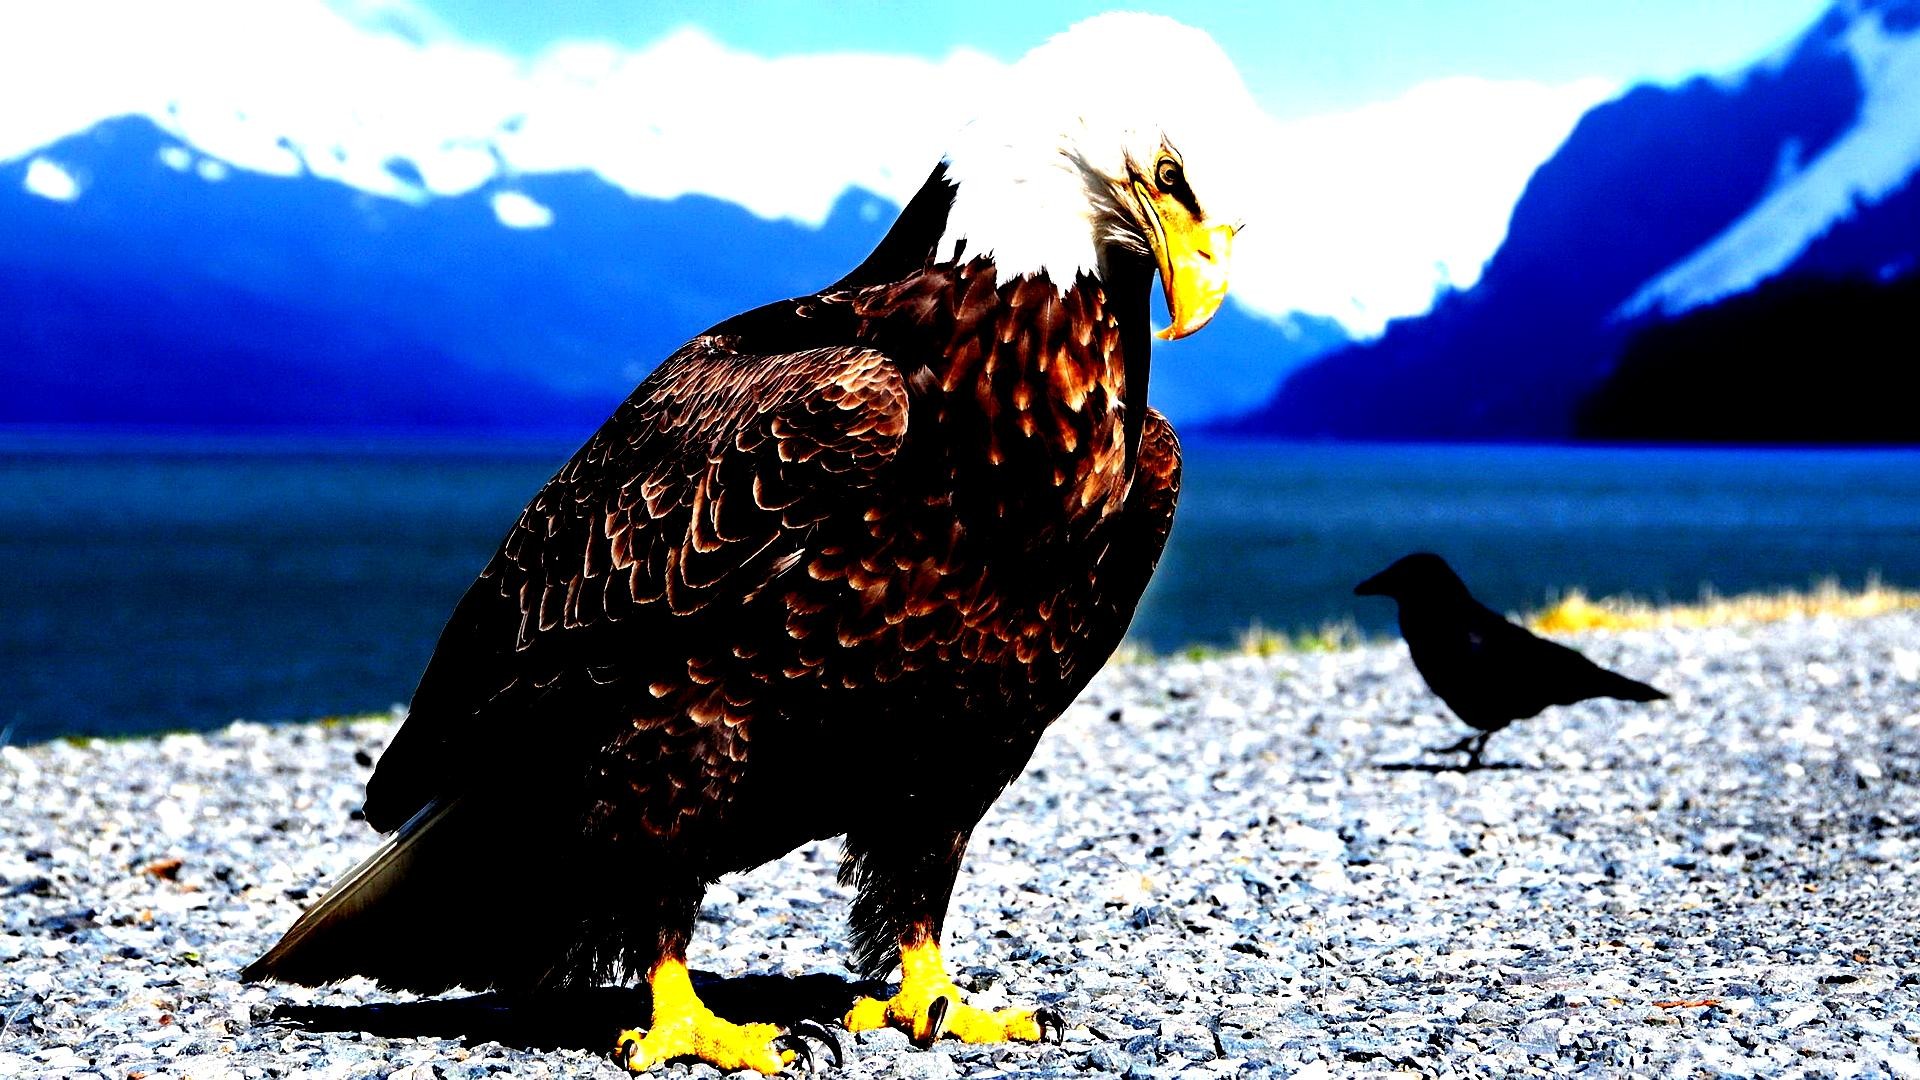 Eagle Claws Feathers Bird HD Wallpaper New